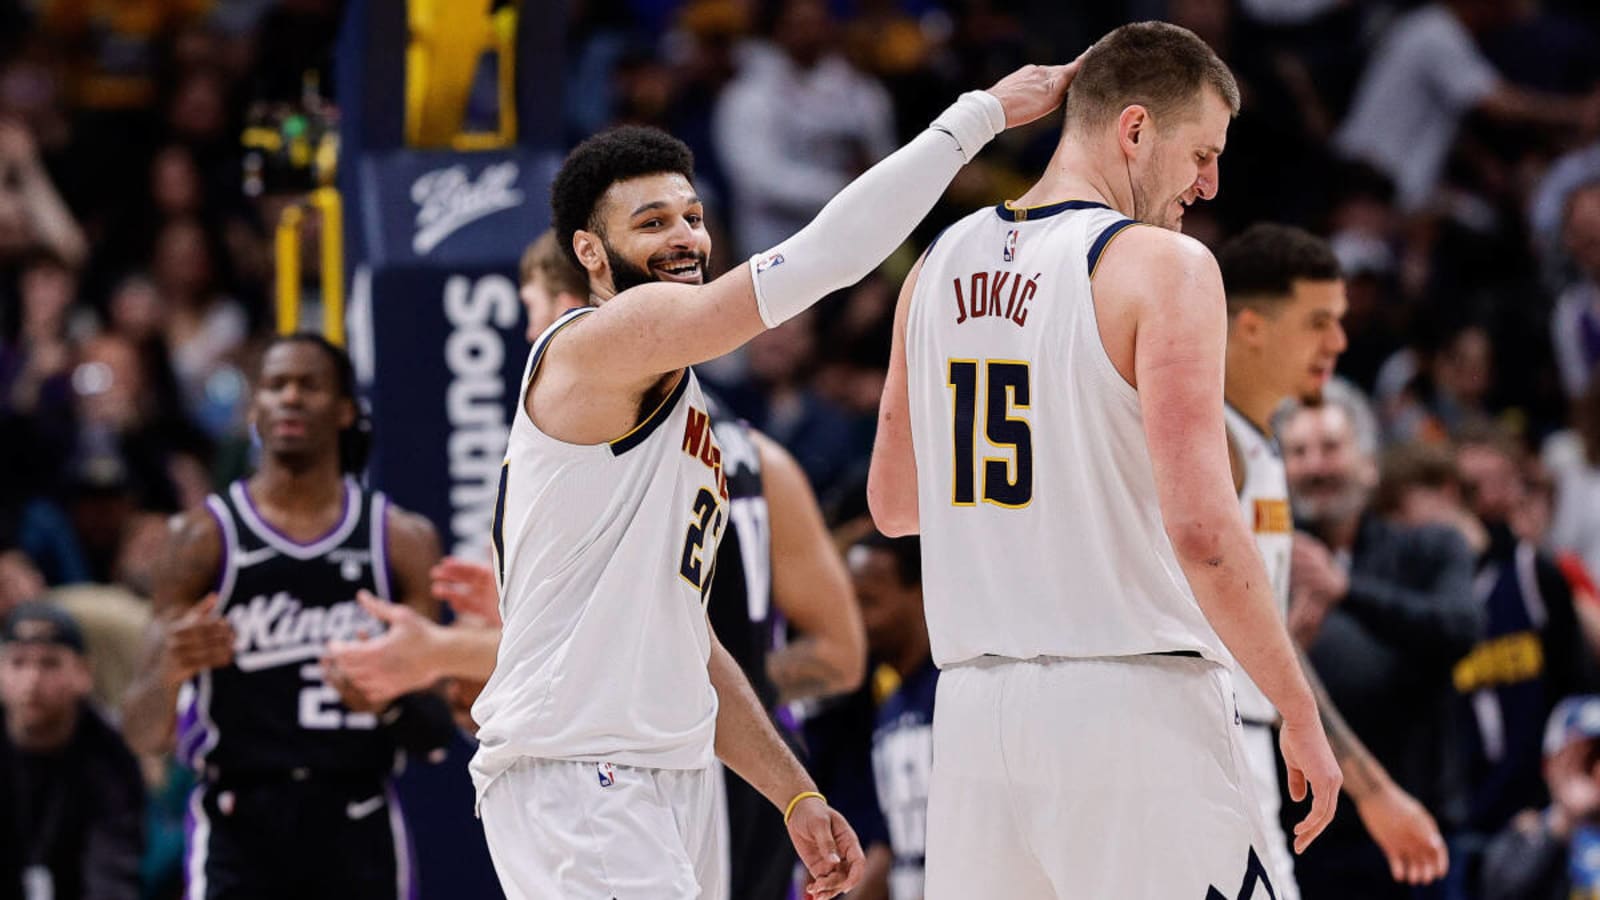 Jamal Murray: 'I Want To Be The Best Player Ever. Jokic Is The Greatest Player Right Now.'